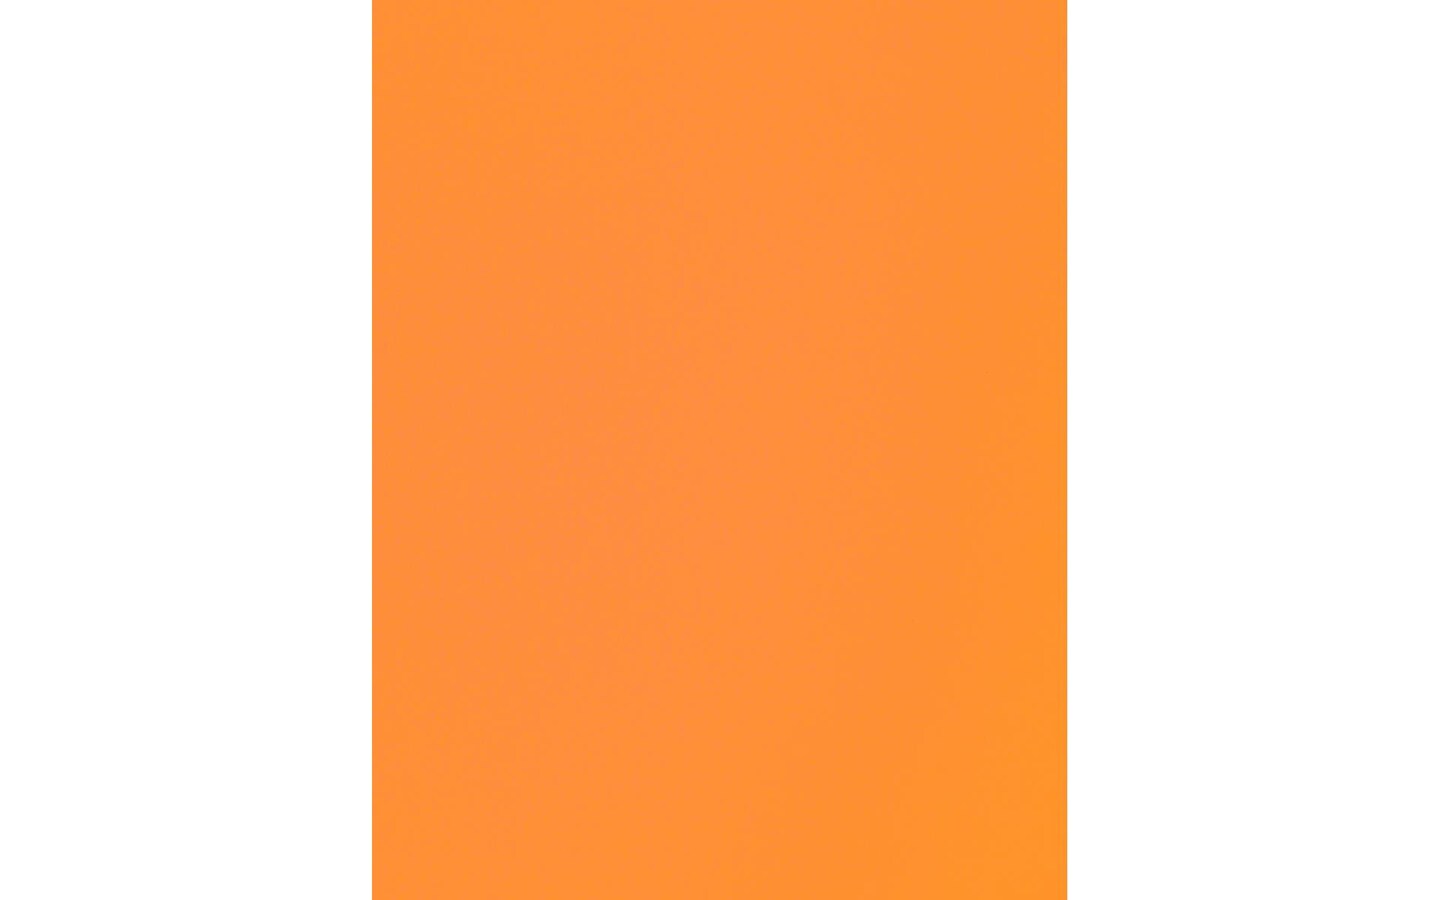 PA Paper Accents Smooth Cardstock 8.5 x 11 Orange, 65lb colored